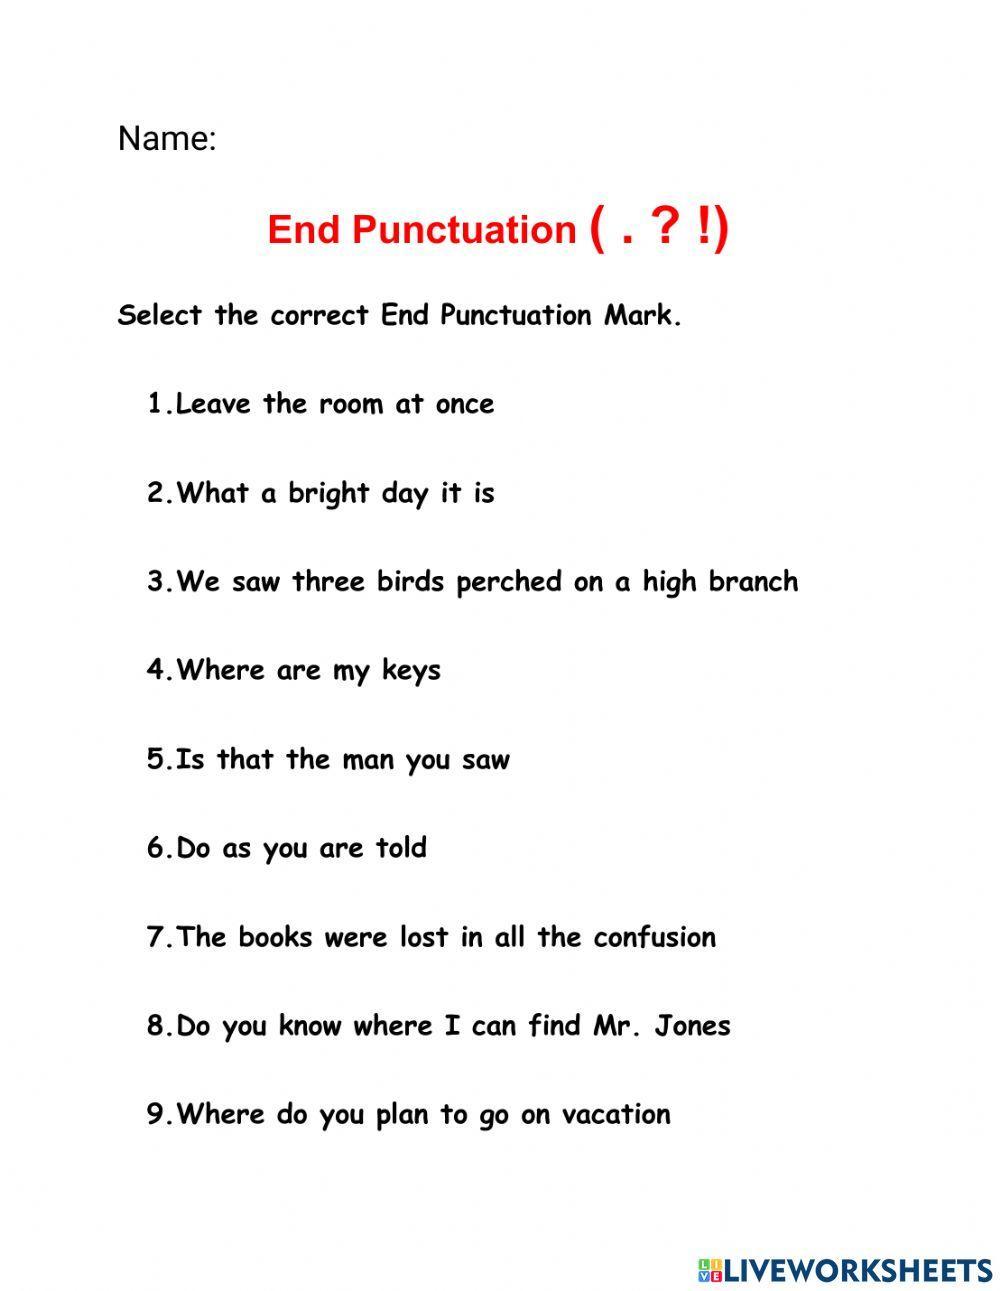 End Punctuation Marks